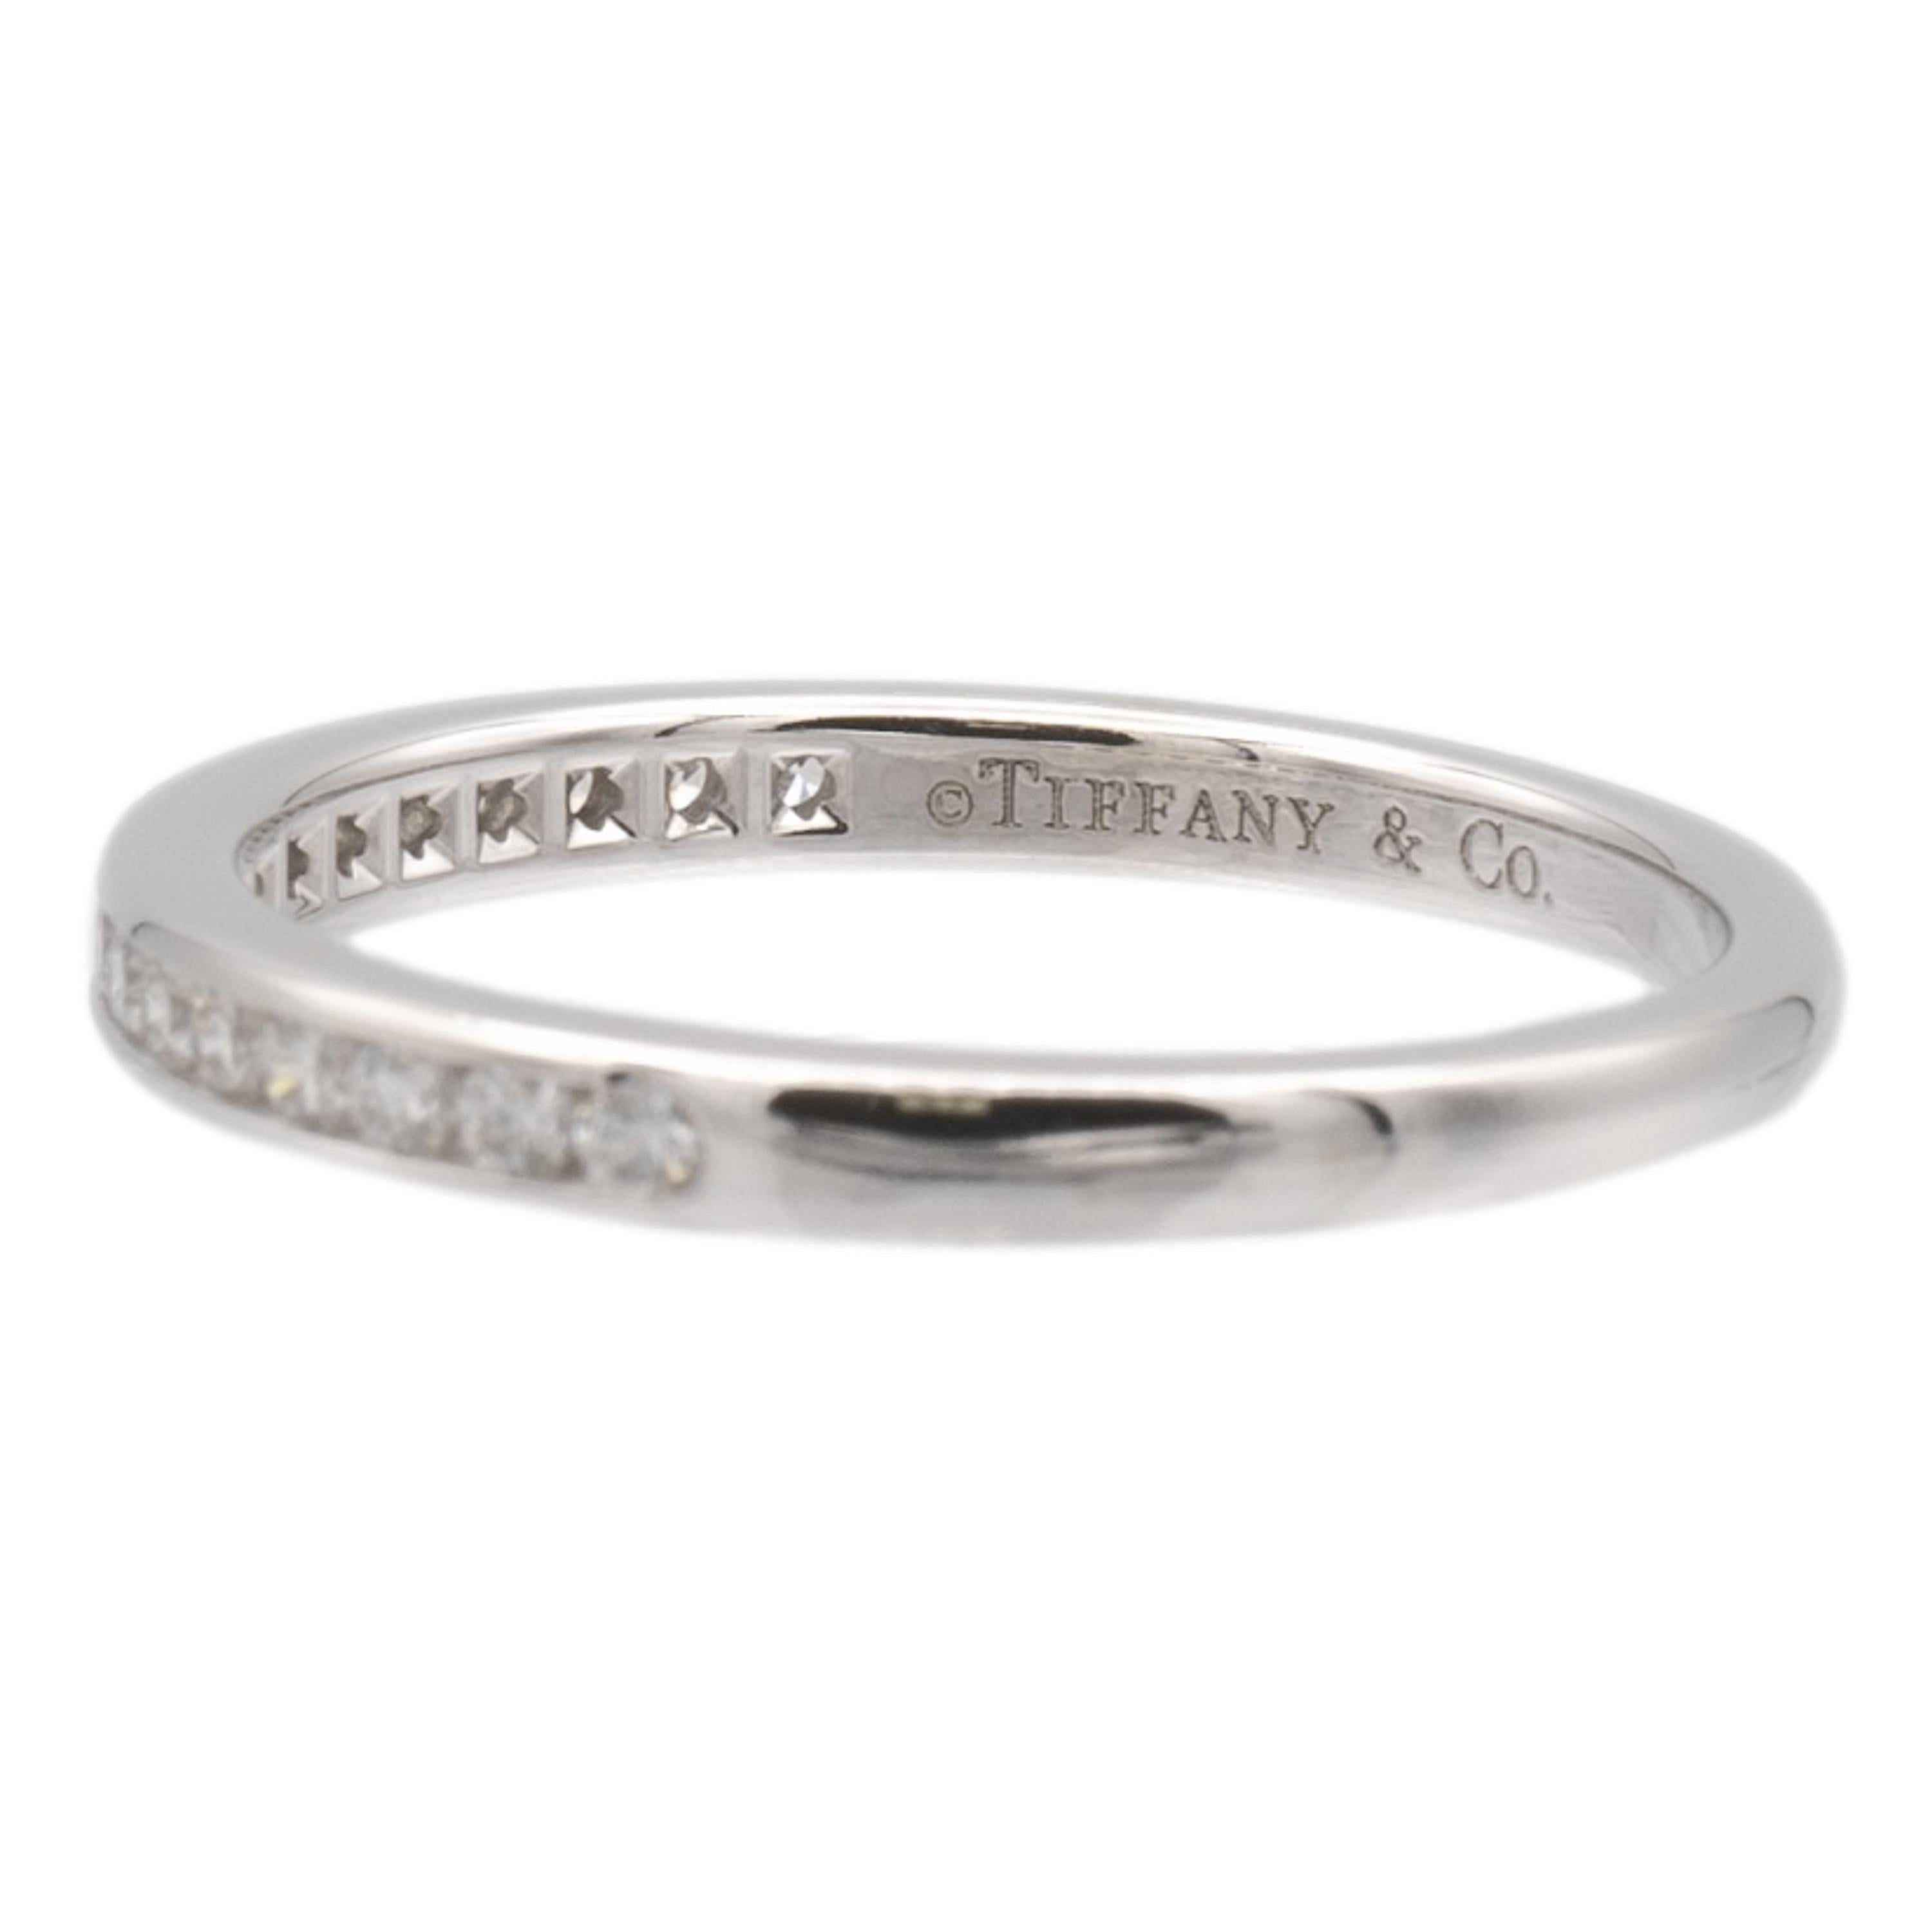 Brilliant Cut Tiffany & Co Platinum Half Circle Eternity Band Ring .17ct 2 mm Size 6.5 For Sale